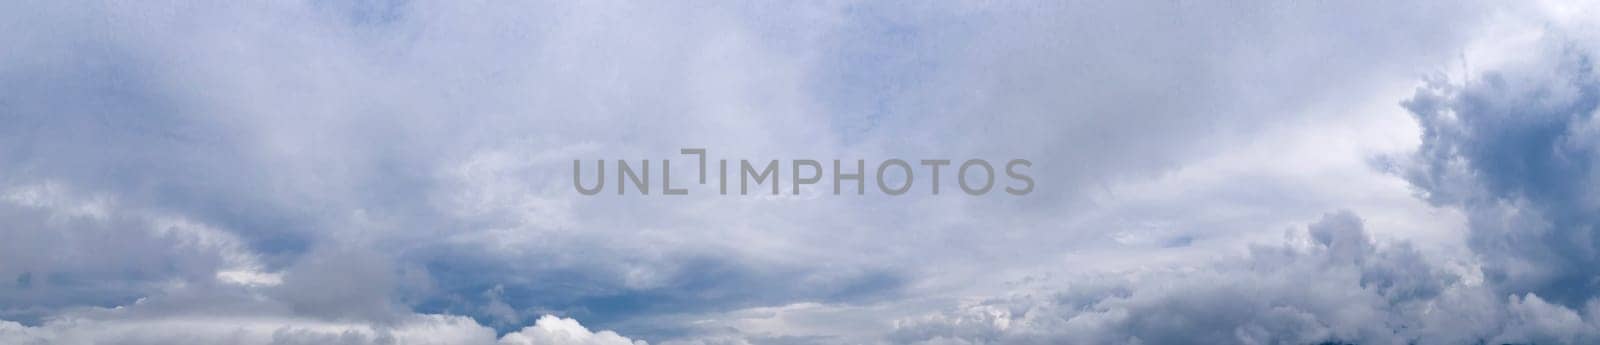 Panoramic view of blue sky with stormy clouds  by EdVal